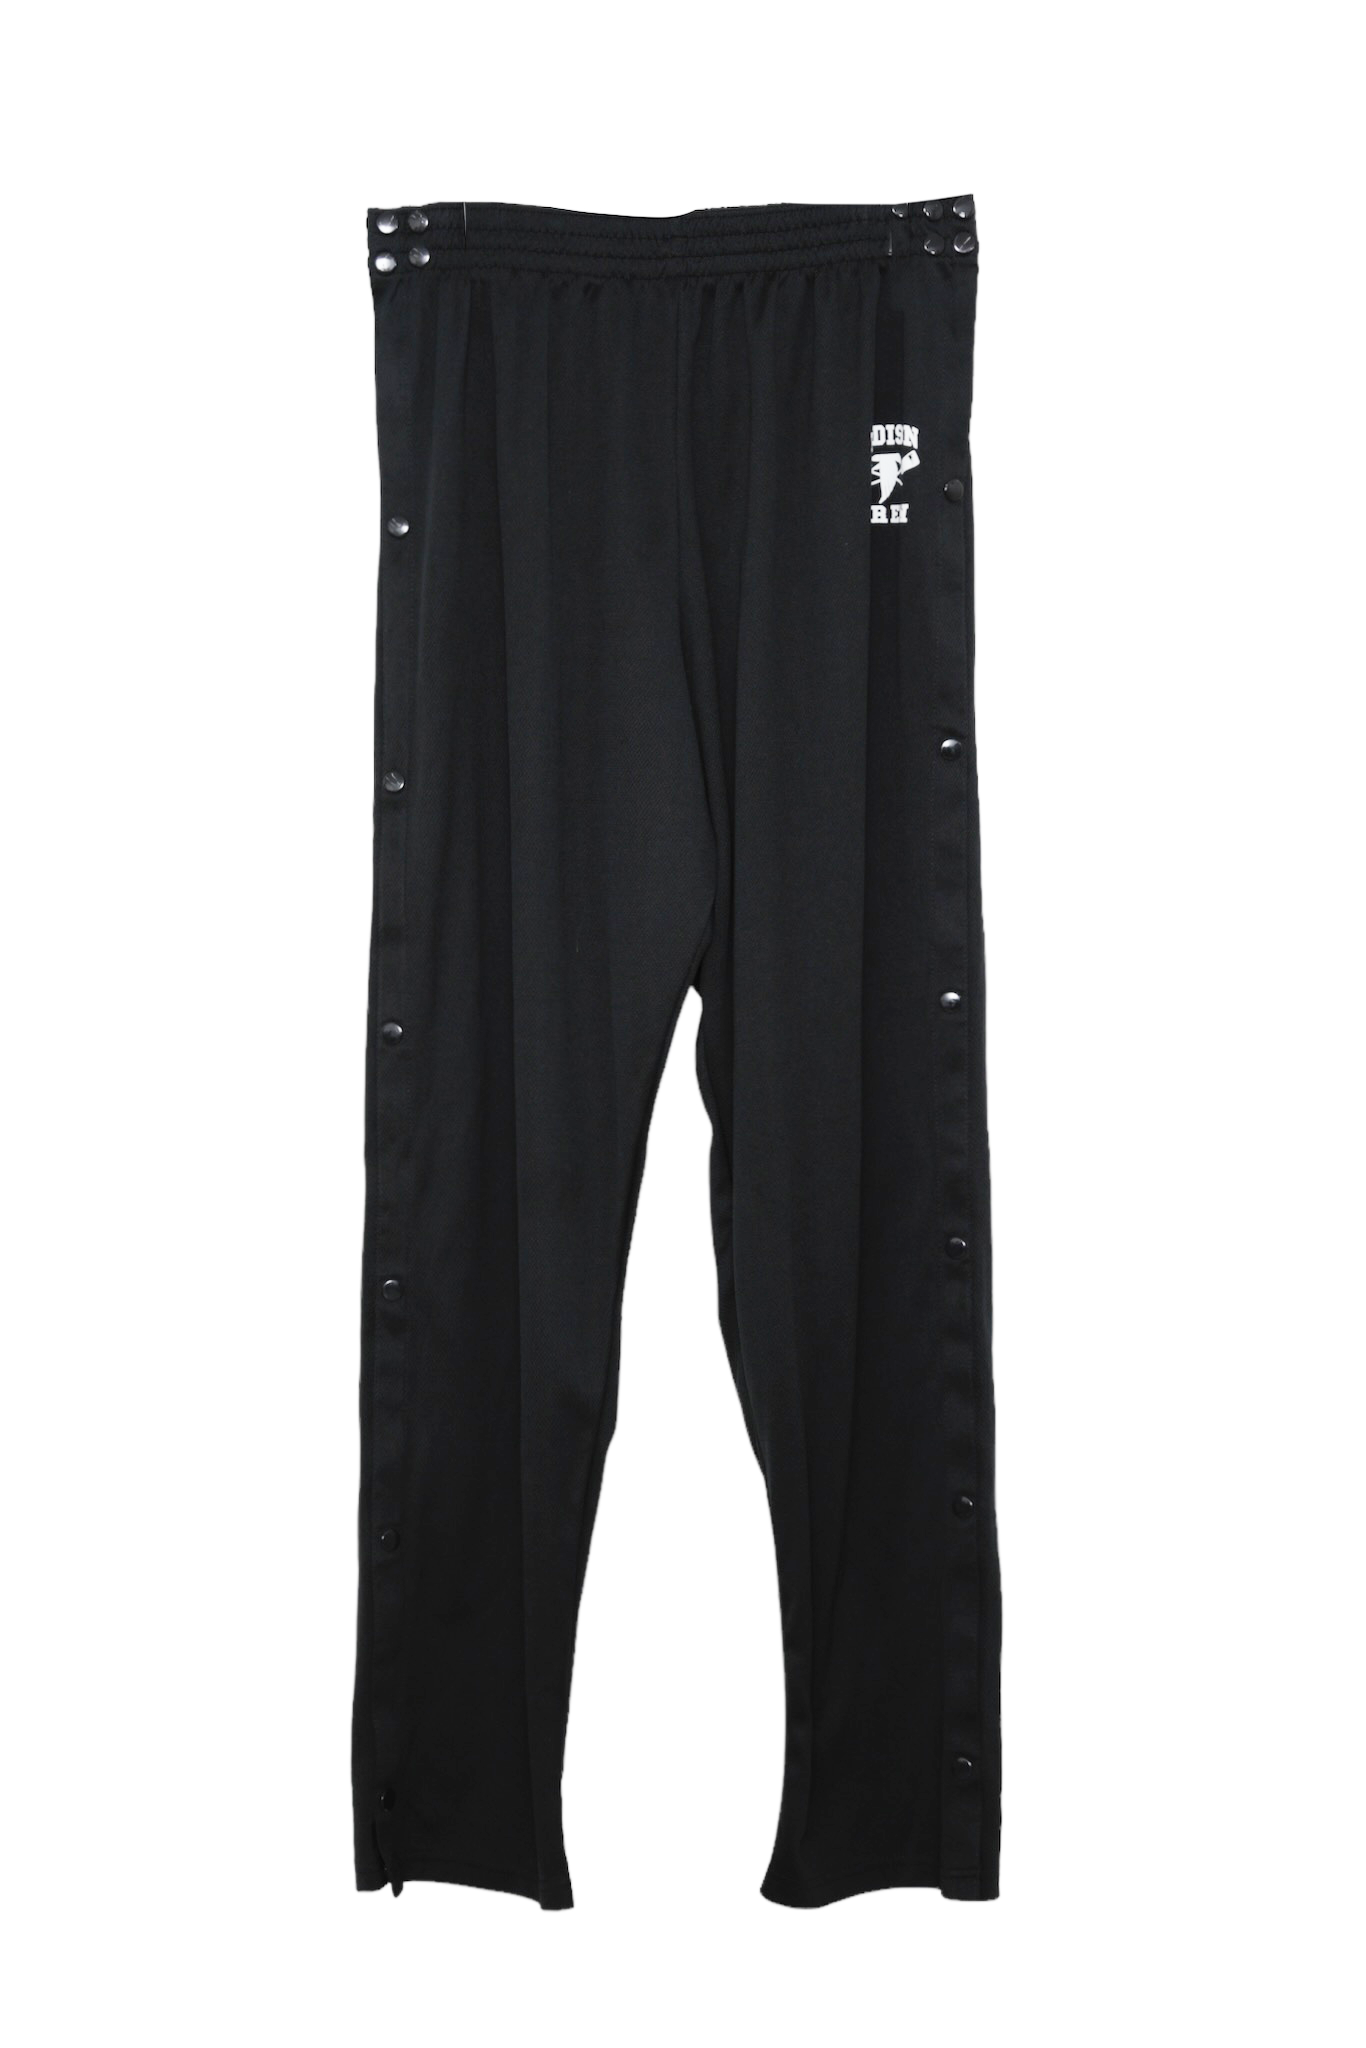 SIDE BUTTON TRACK PANTS